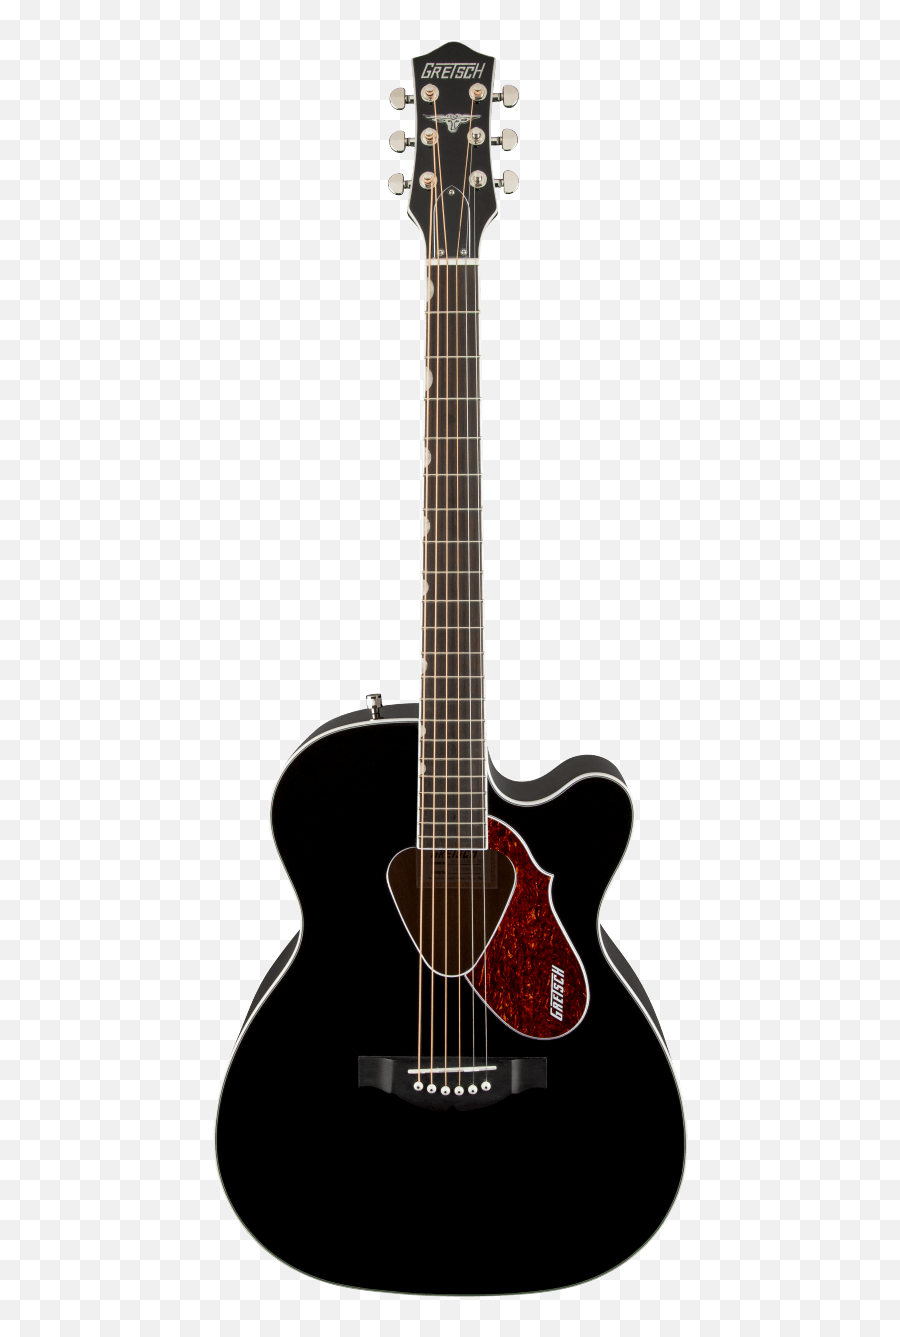 Acoustic Collection Emoji,Acoustic Guitar Clipart Black And White